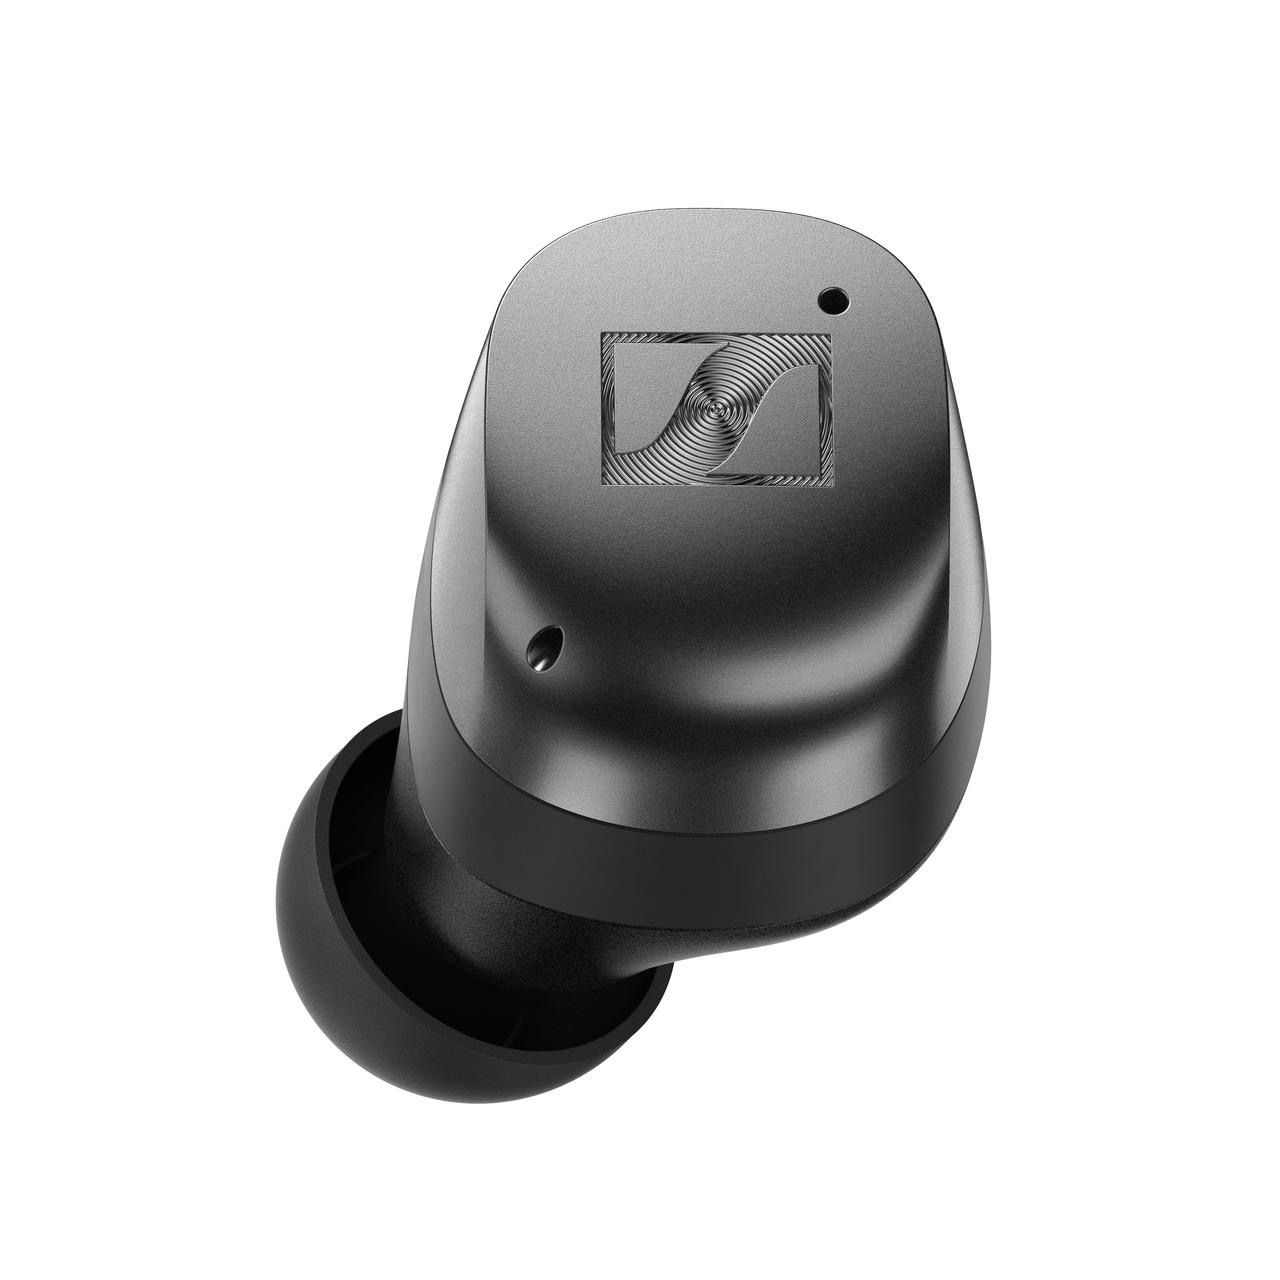 Sennheiser Momentum True Wireless 4 earbuds launched in India